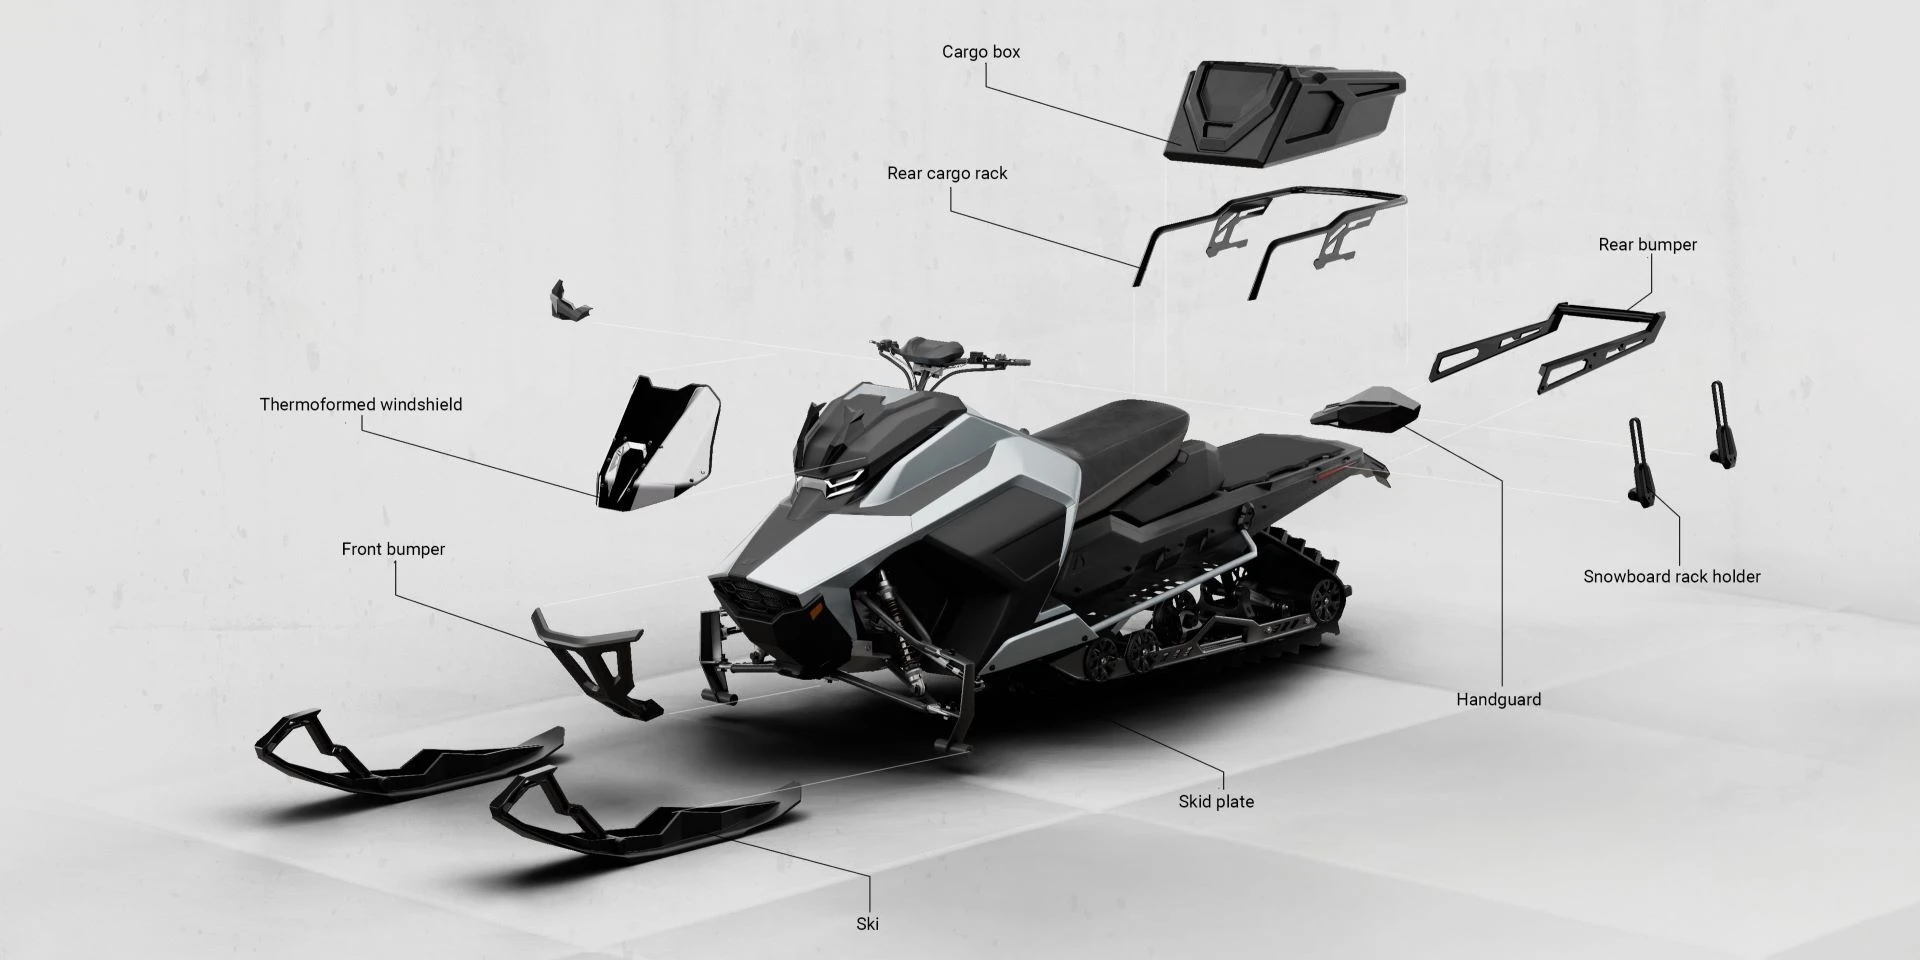 Snowmobile exploded view English 1920 x 960